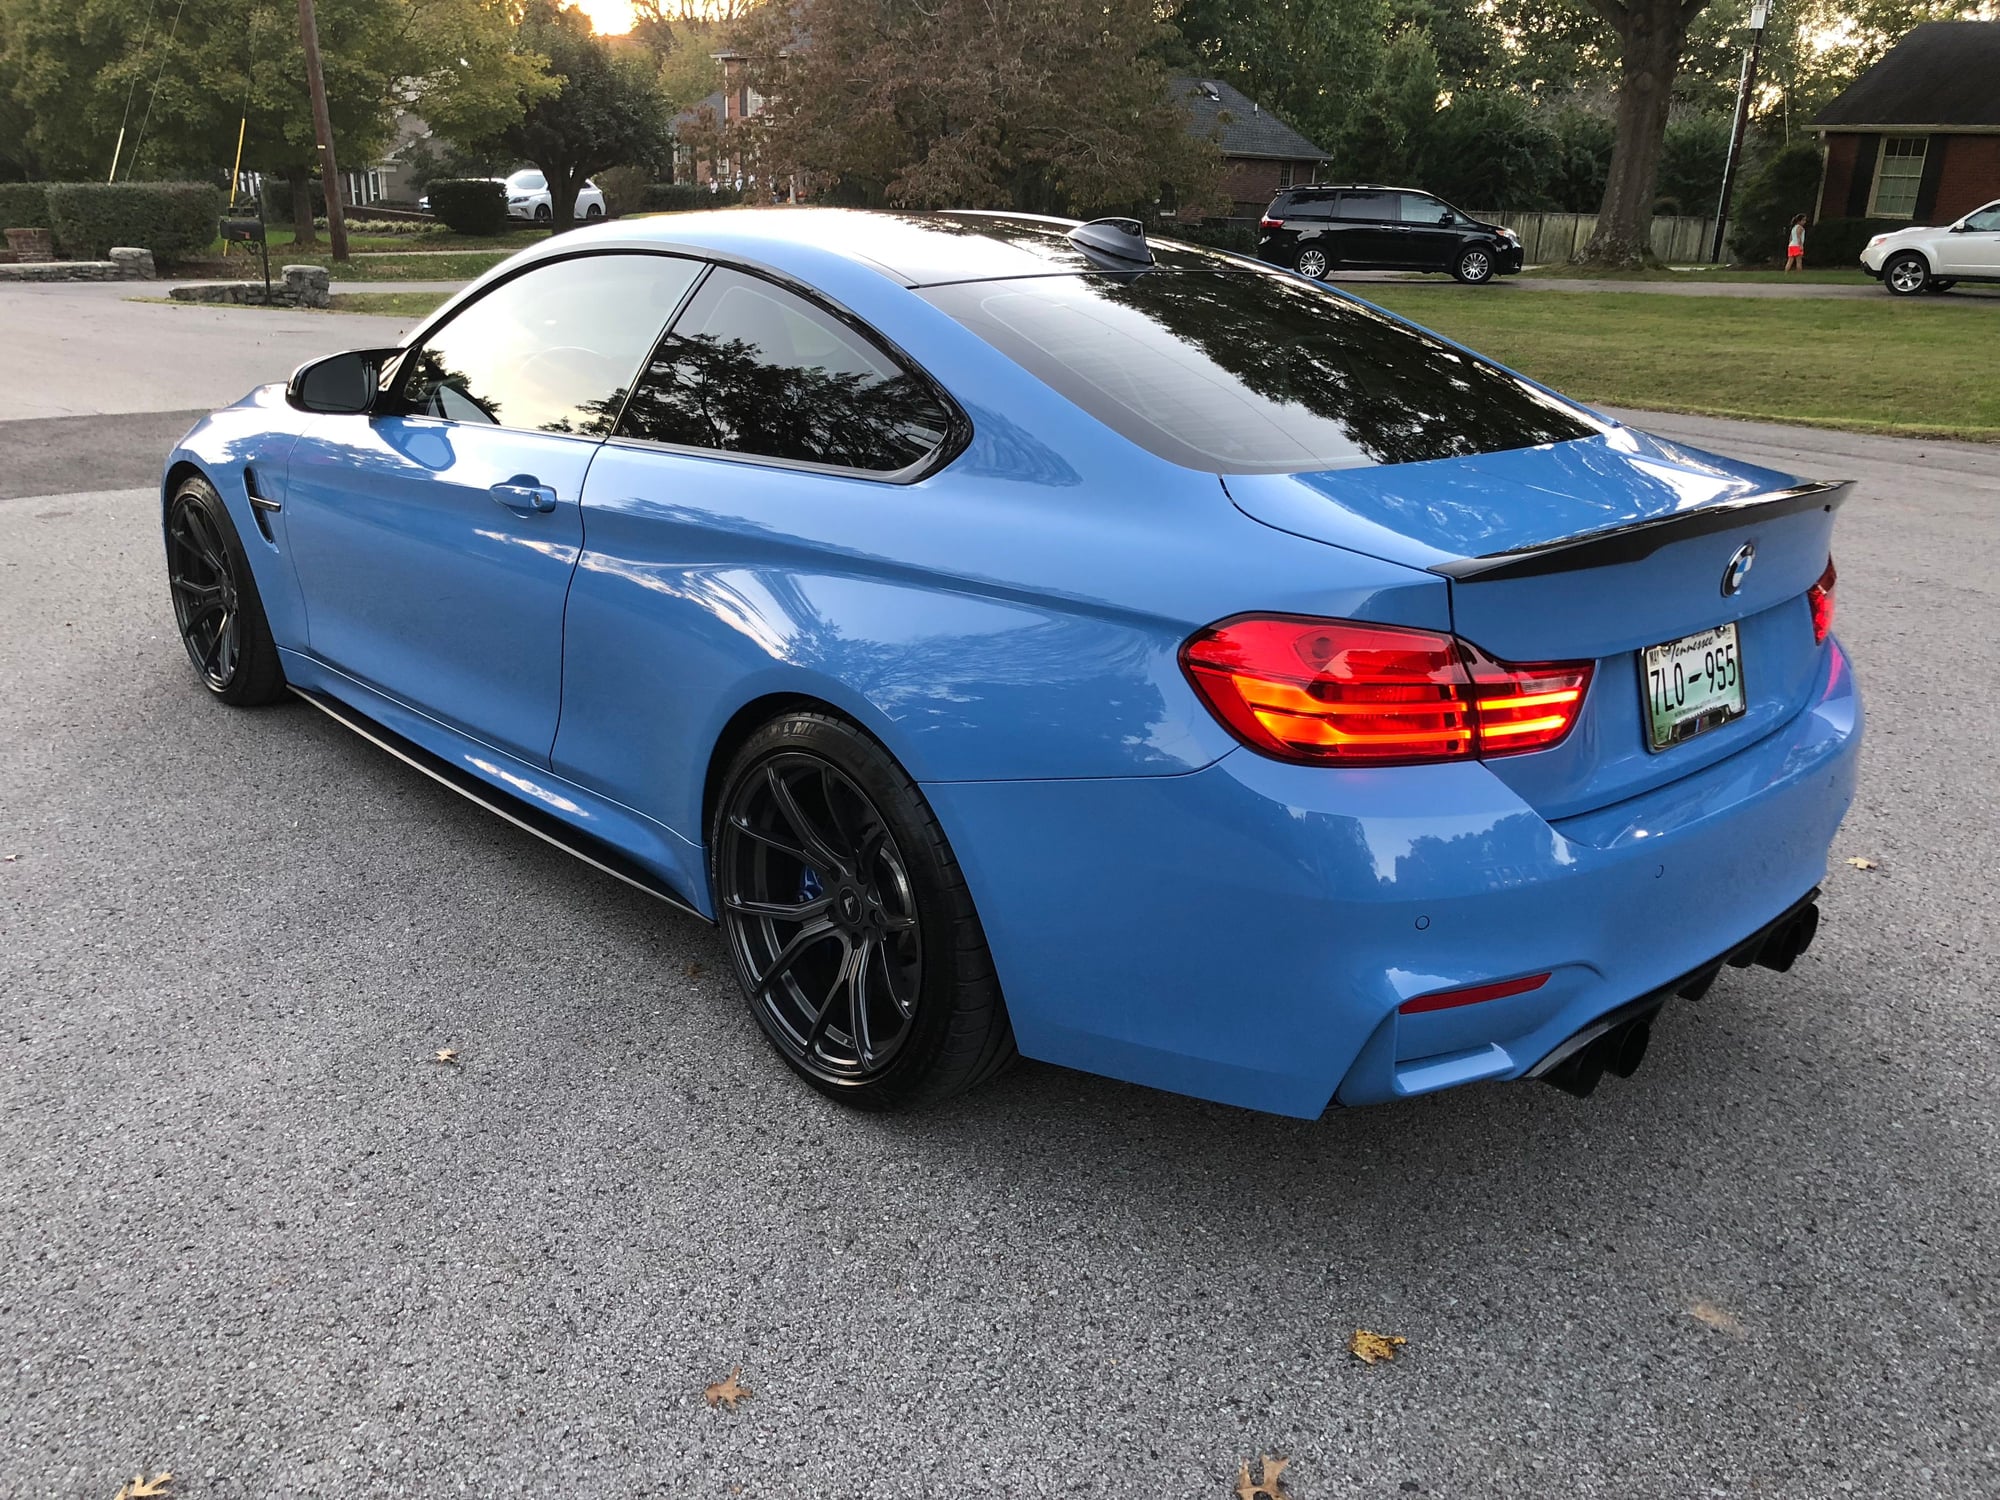 2015 BMW M4 - 2015 BMW M4 DINAN; Loaded; Low Miles - Used - VIN wbs3r9c57fk334286 - 12,500 Miles - 6 cyl - 2WD - Automatic - Coupe - Blue - Brentwood, TN 37027, United States